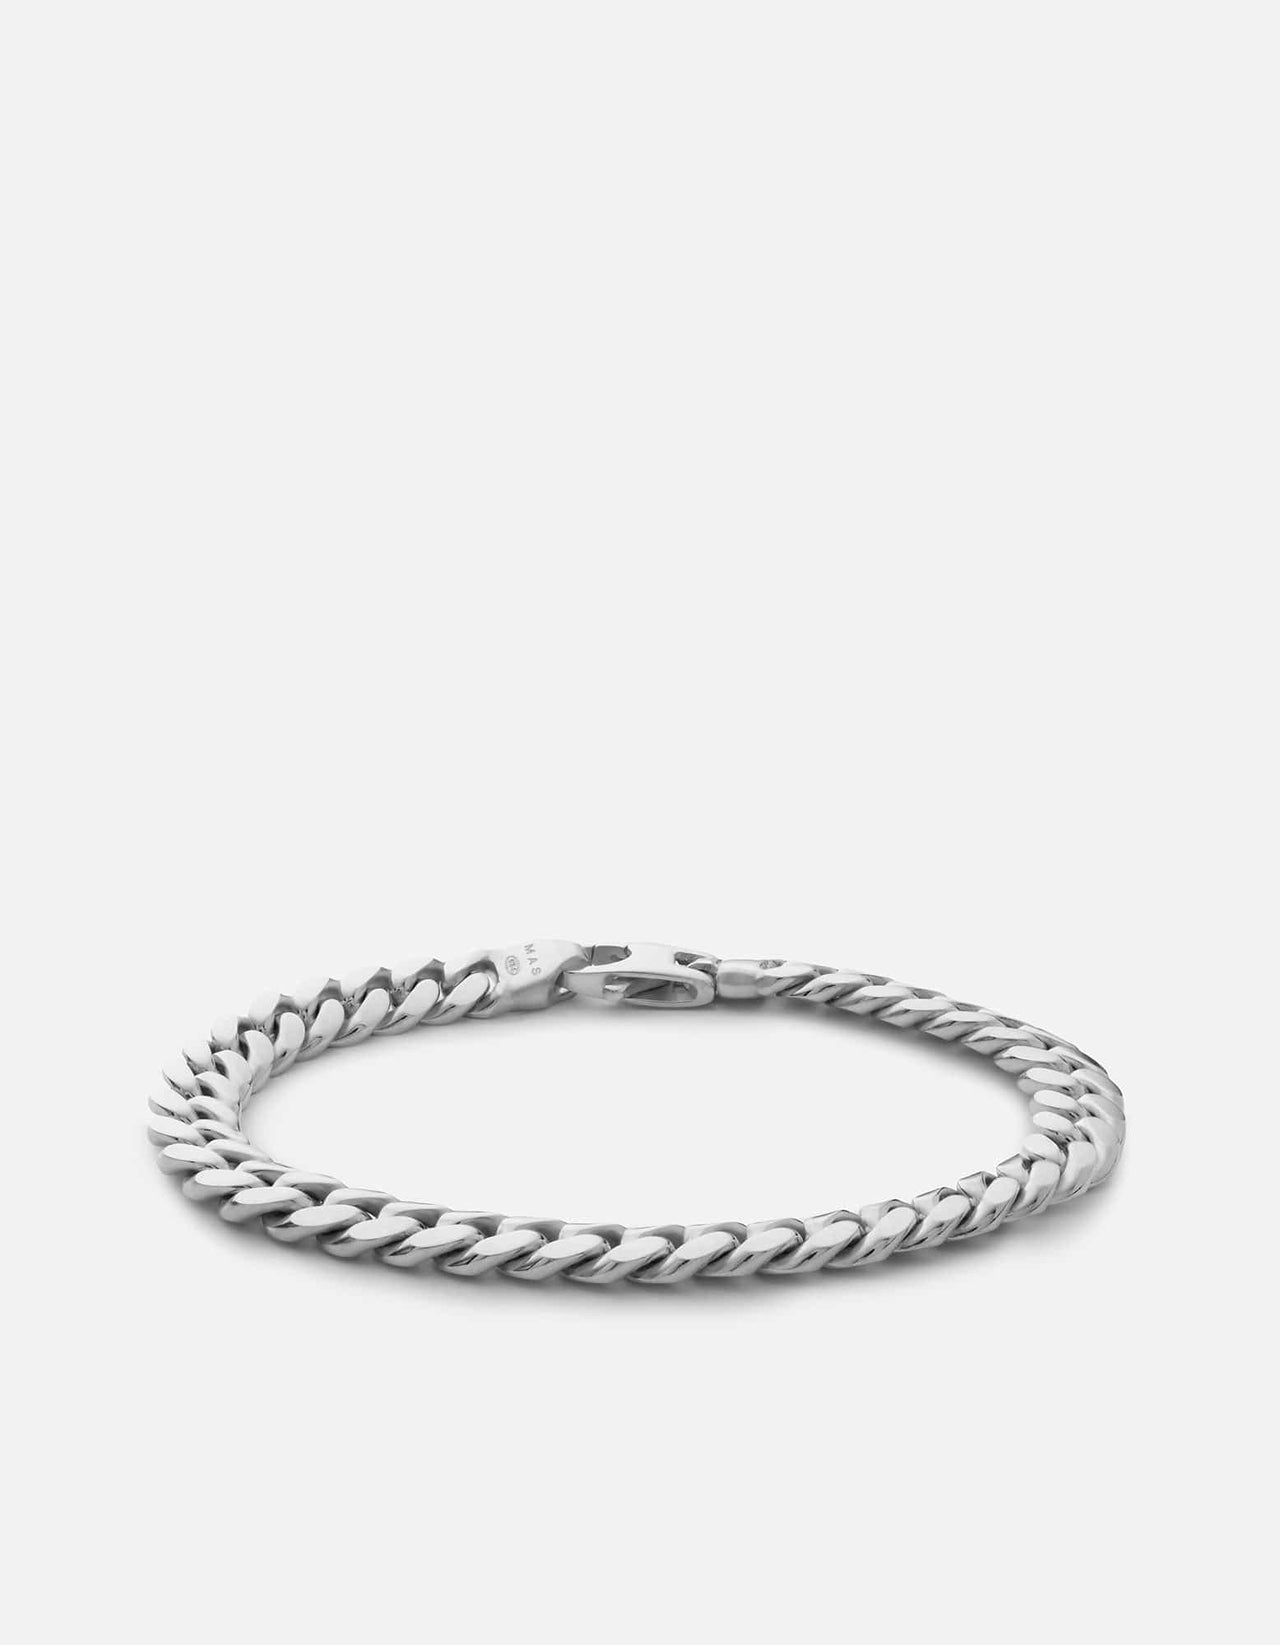 Twisted Silver Cuff Bracelet for Men | 925 Sterling Silver - VY Jewelry